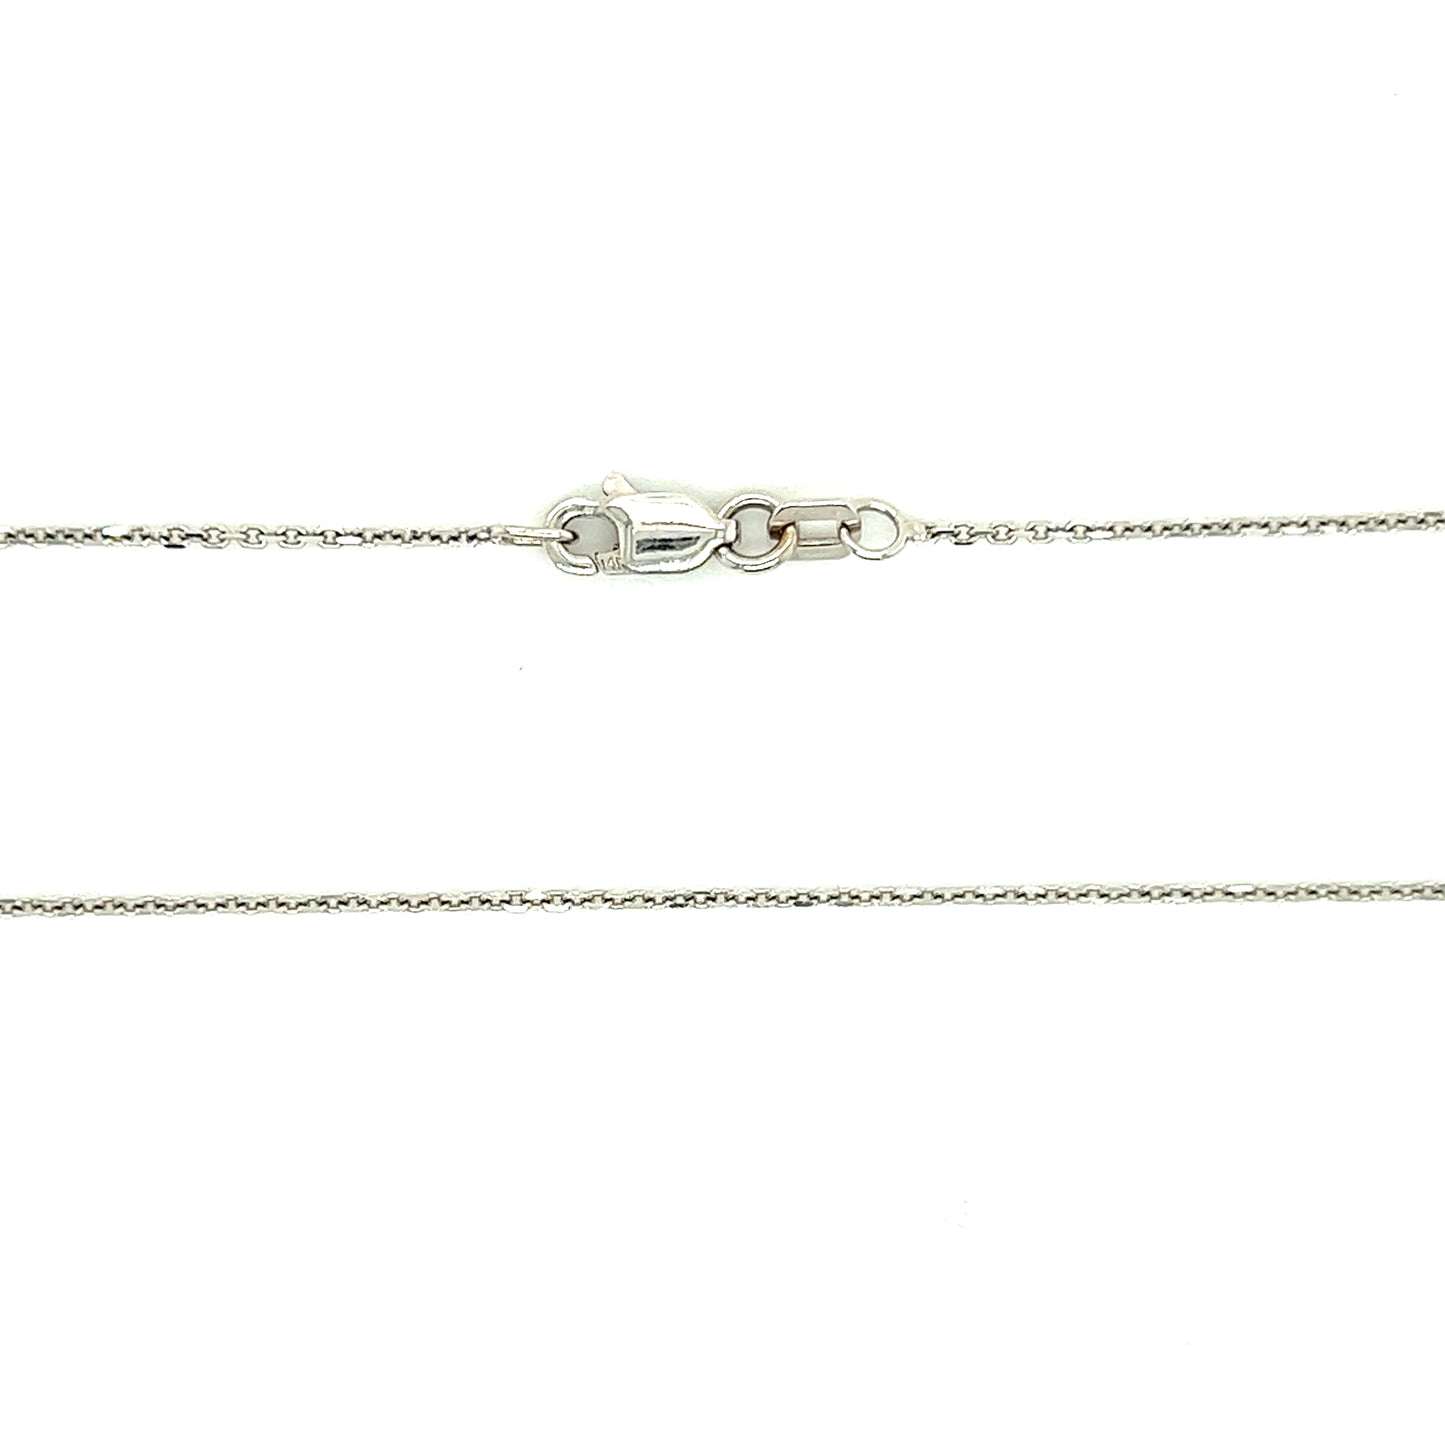 Cable Chain 1.0mm with Adjustable Length in 14K White Gold Chain and Clasp View